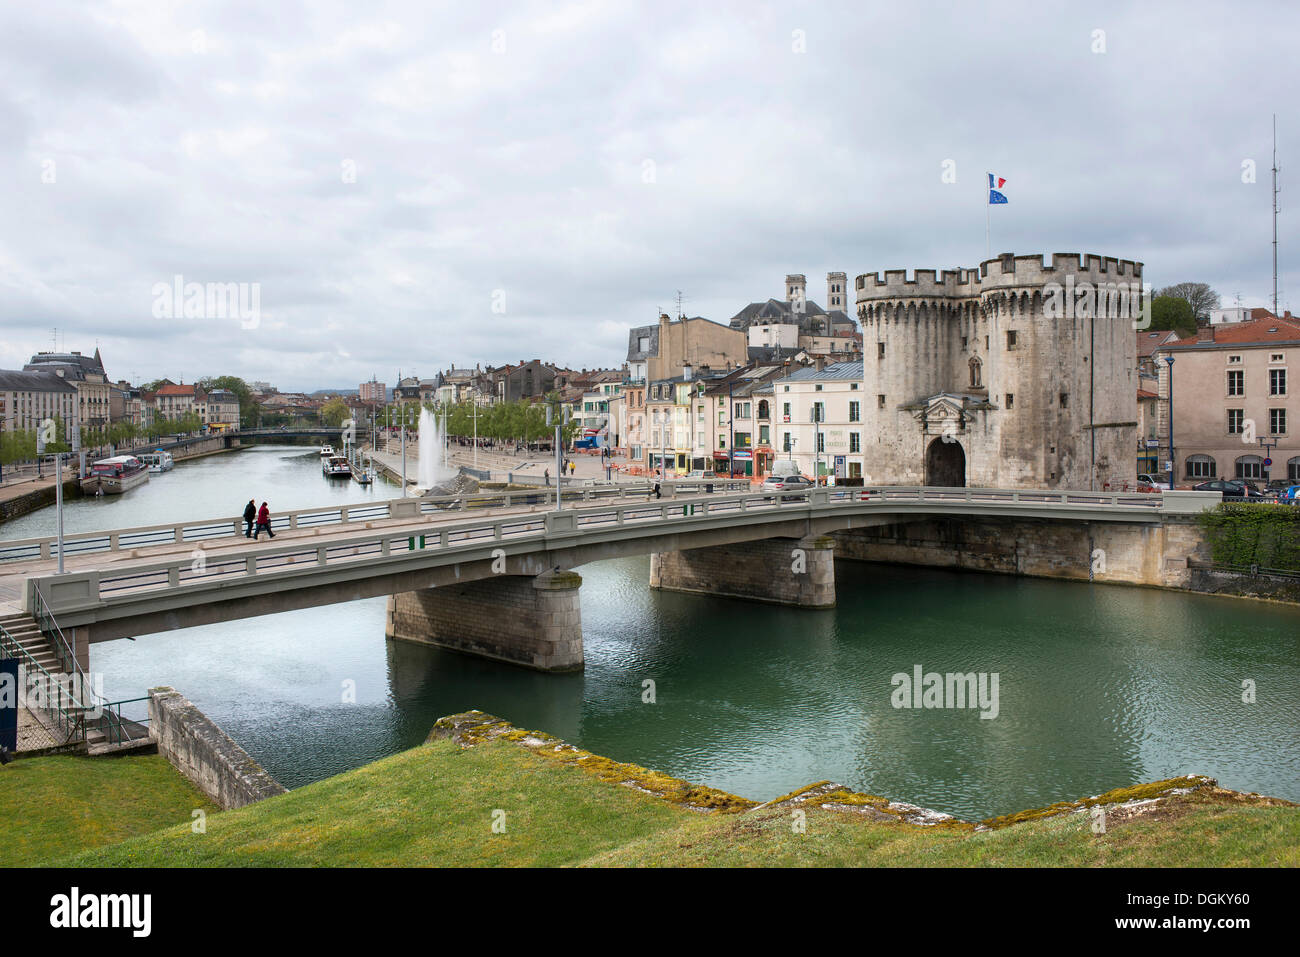 The Maas river with a road bridge, historical town gate and houses on the waterfront, Verdun, Lorraine, France, Europe Stock Photo